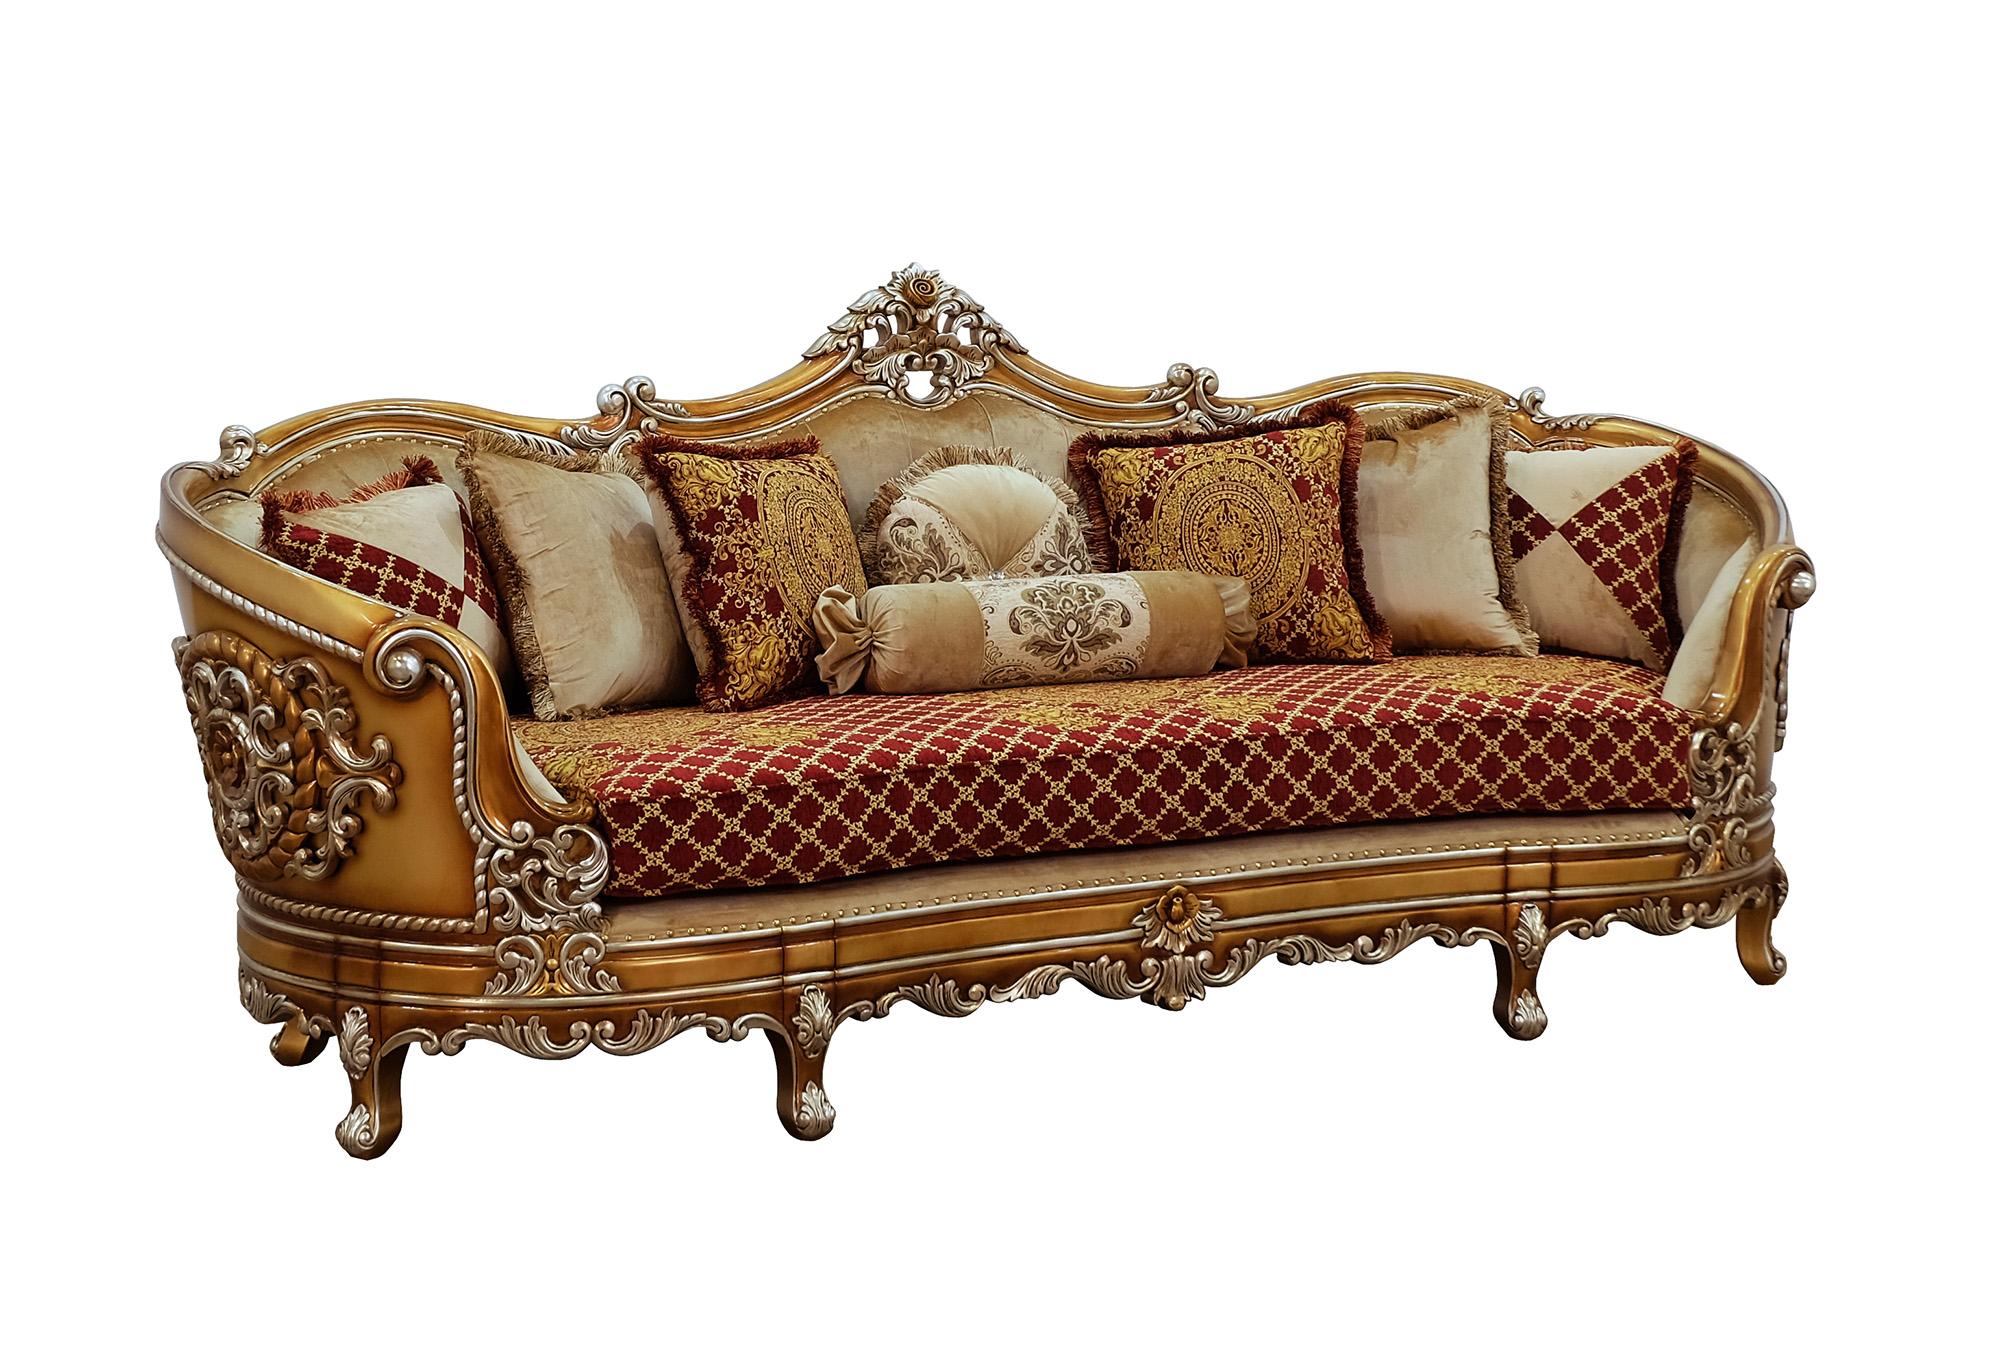 Classic, Traditional Sofa SAINT GERMAIN 35554-S in Sand, Red, Gold Fabric